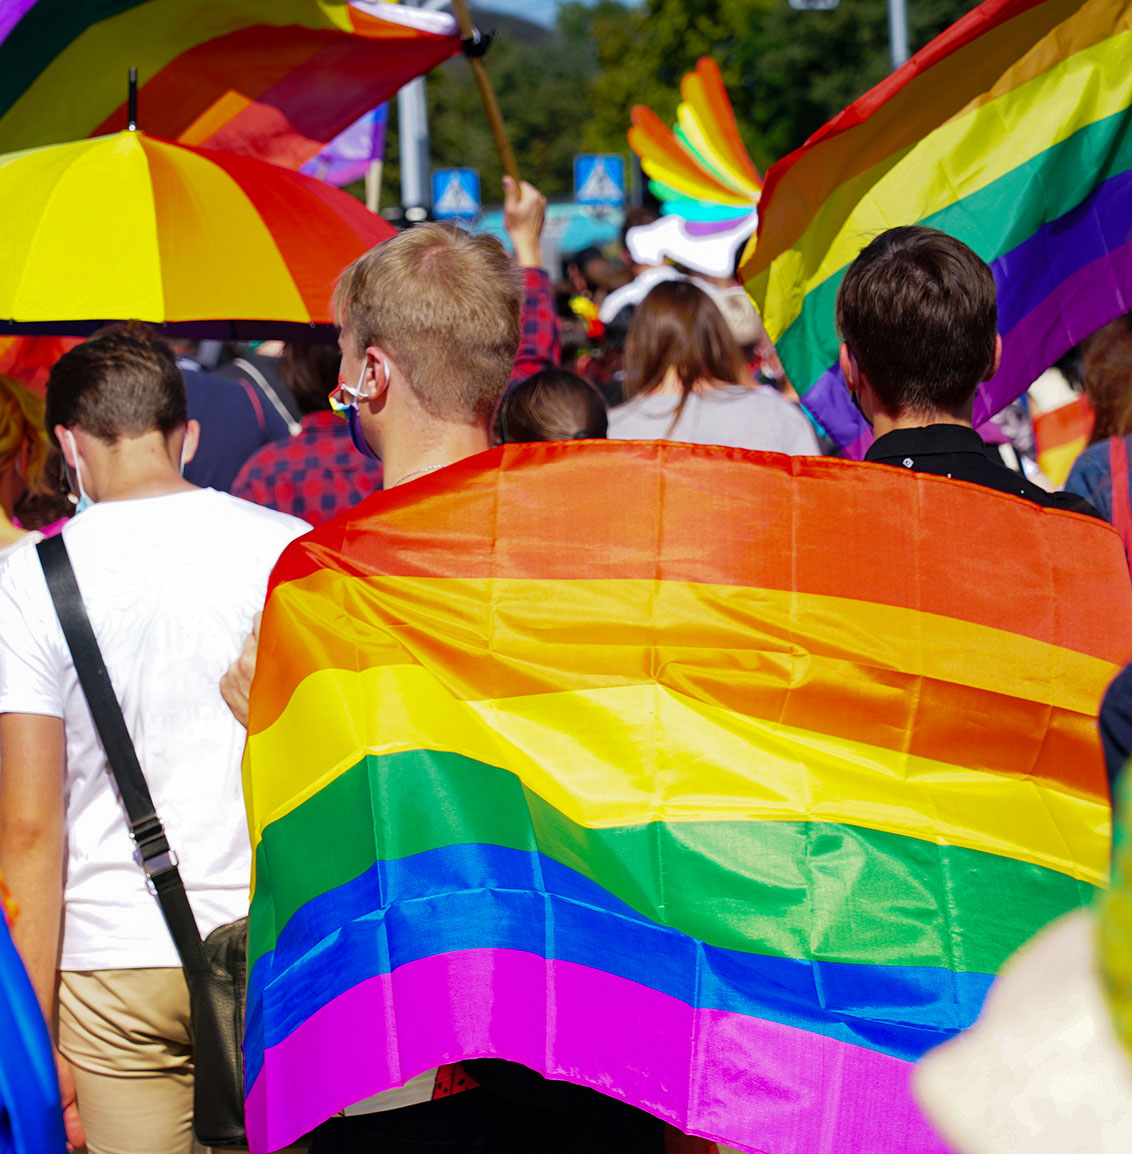 Teens marching in a pride parade.